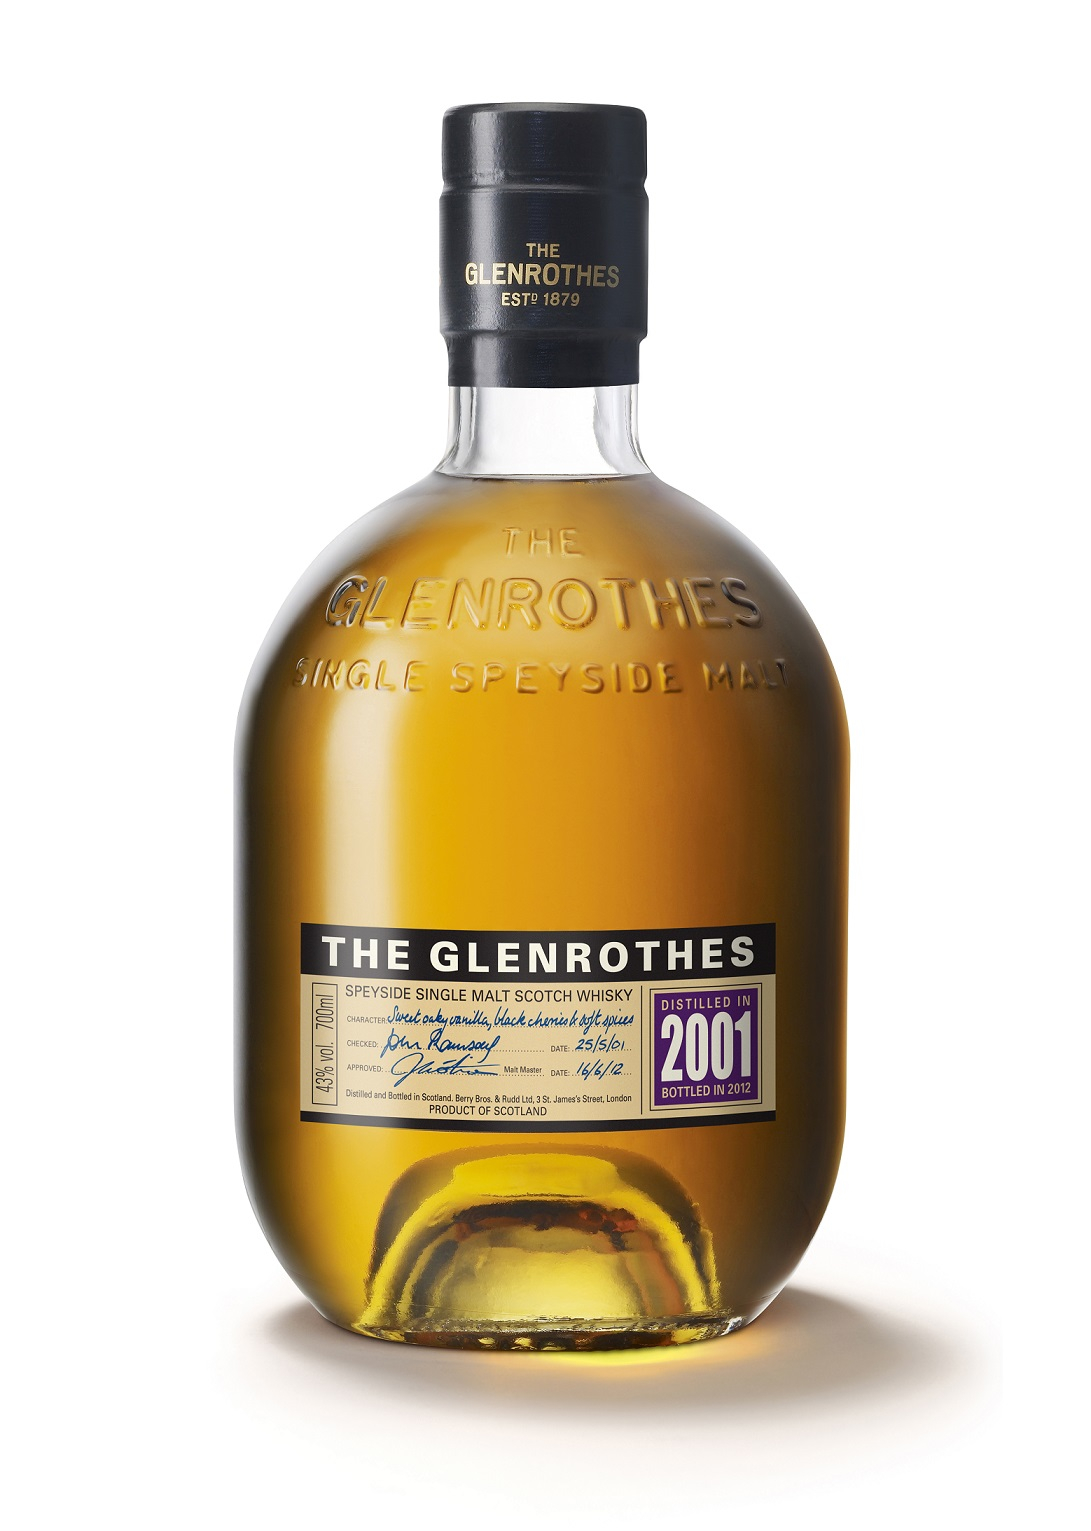 The Glenrothes Vintage 2001 Whisky